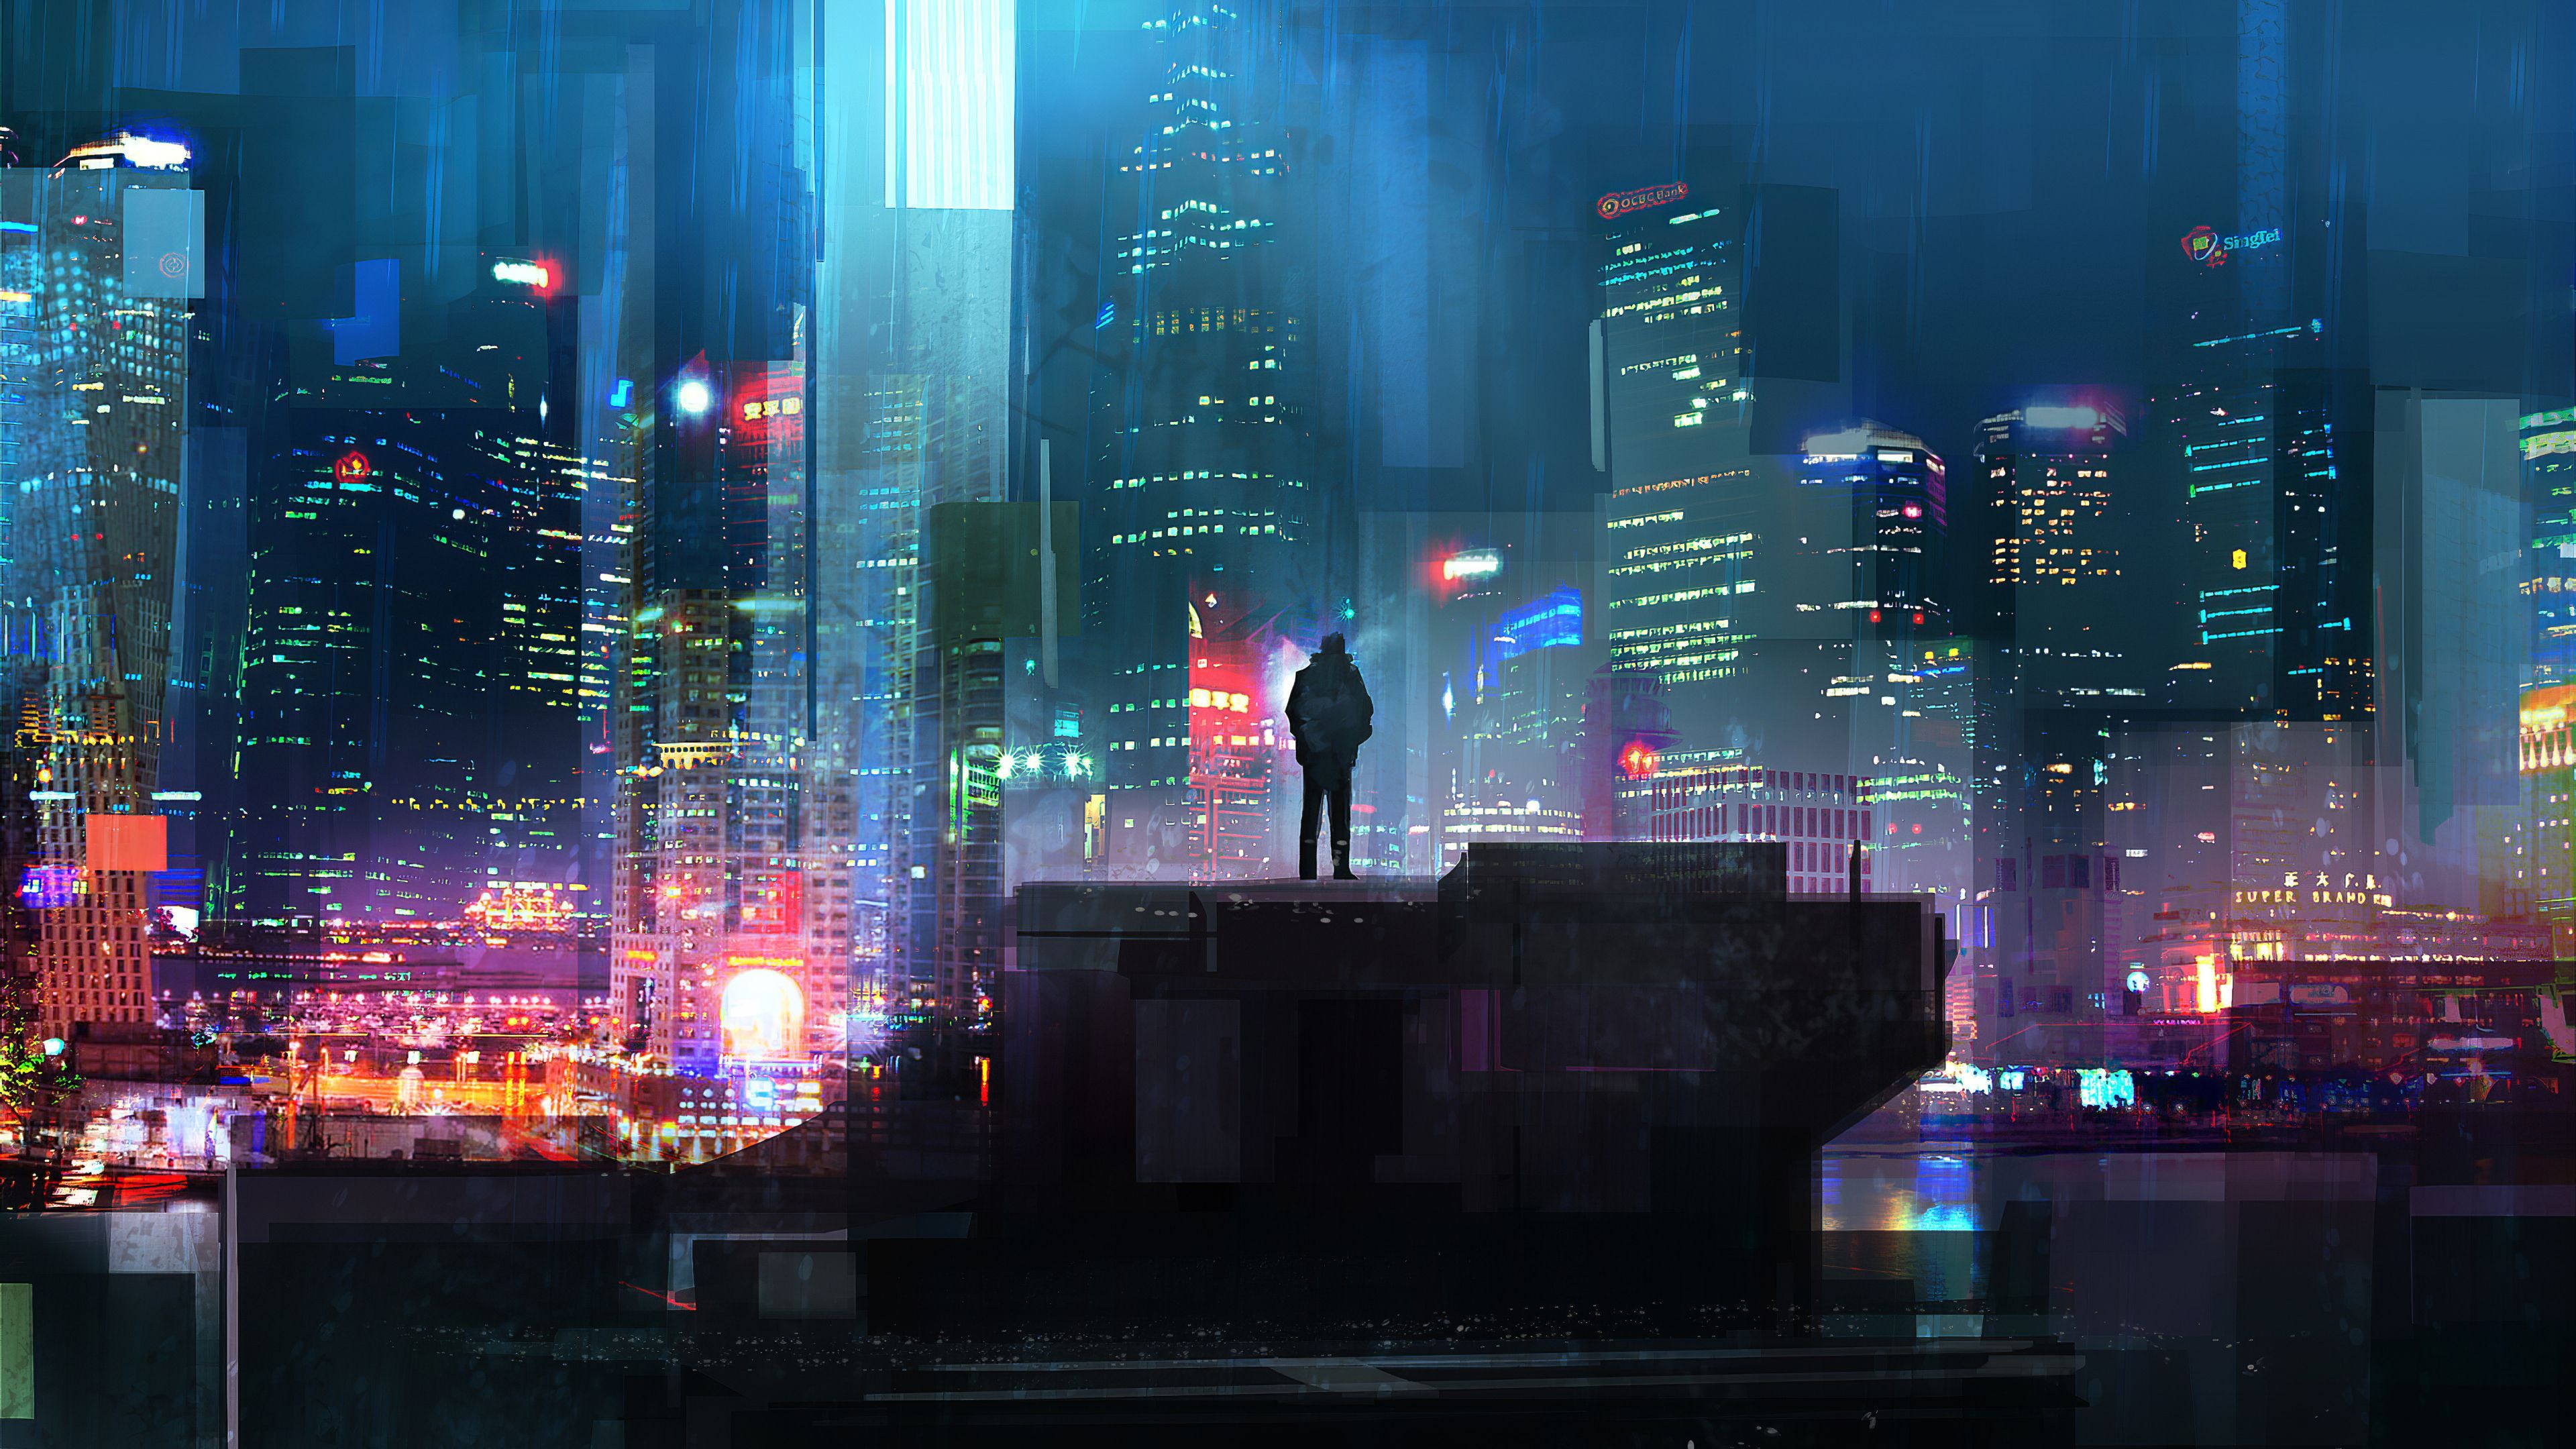 A person standing on a building looking at the city - Cyberpunk